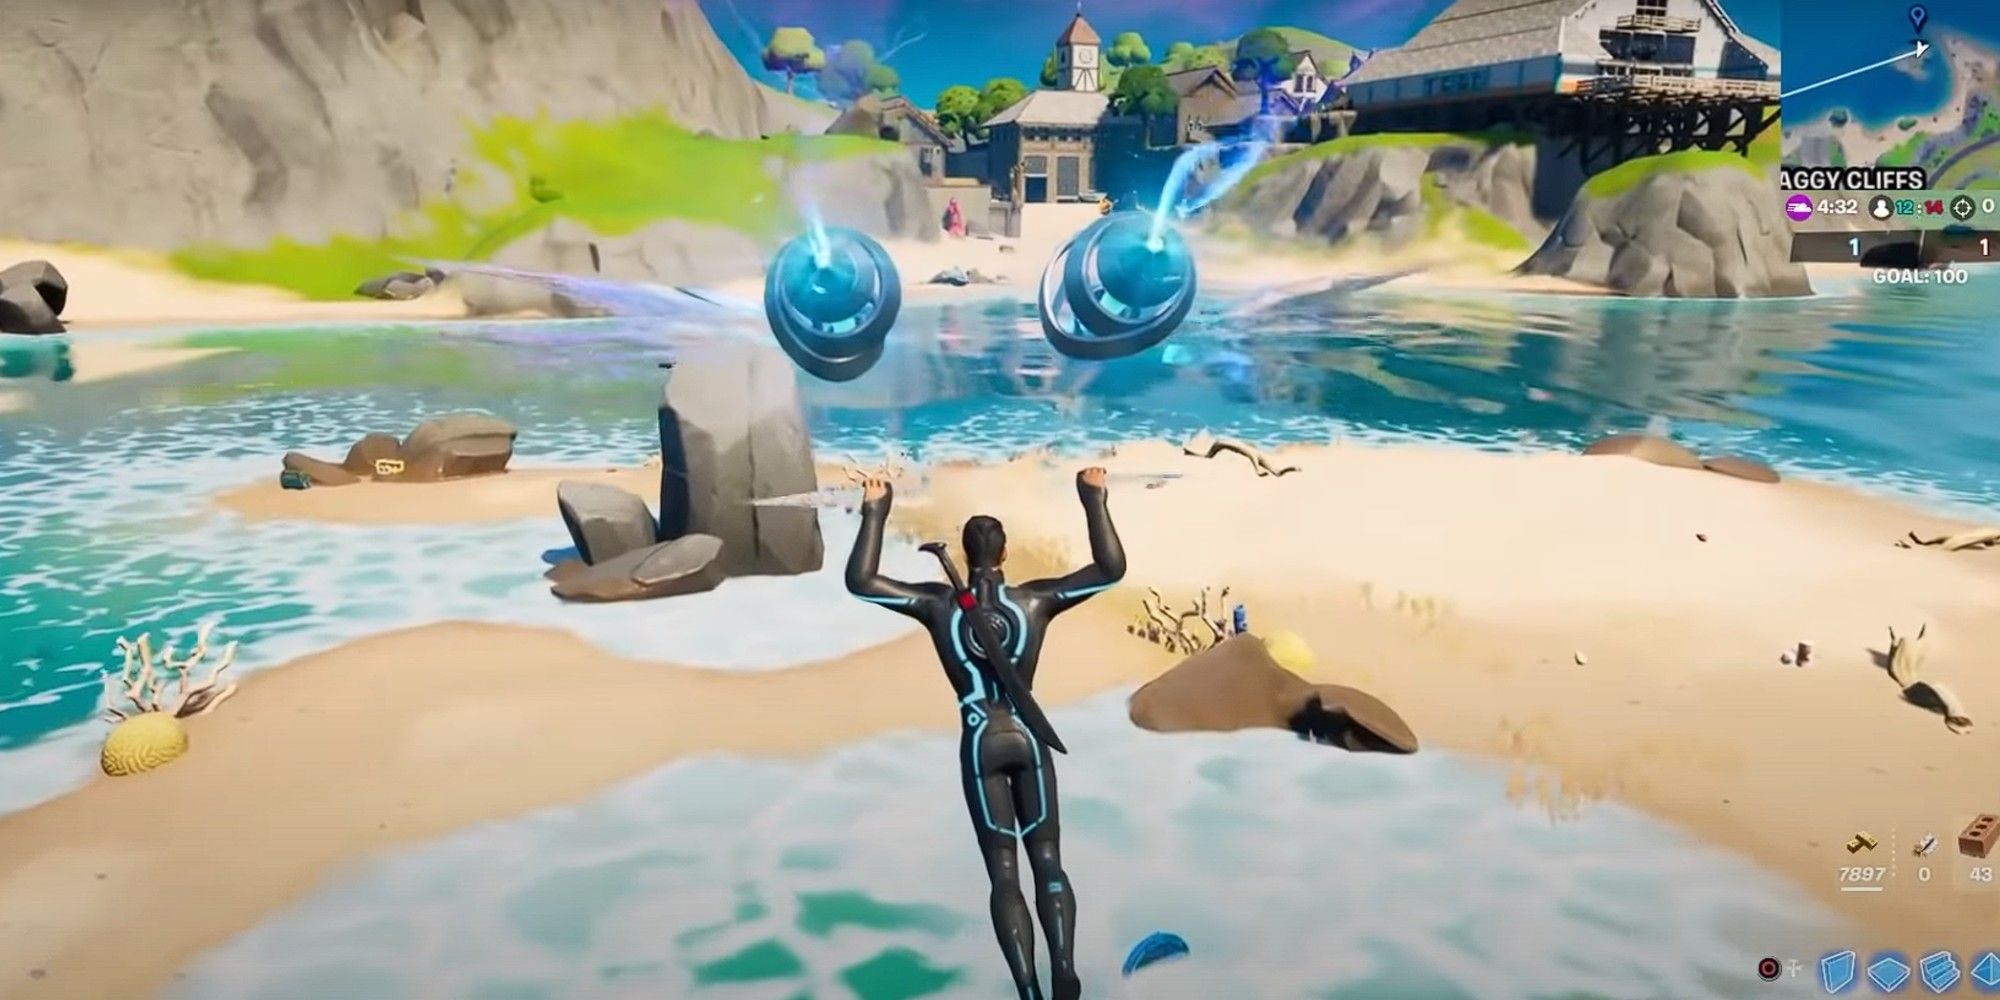 A player glides to a Blue XP Coin in the ocean waters in Fortnite Season 5